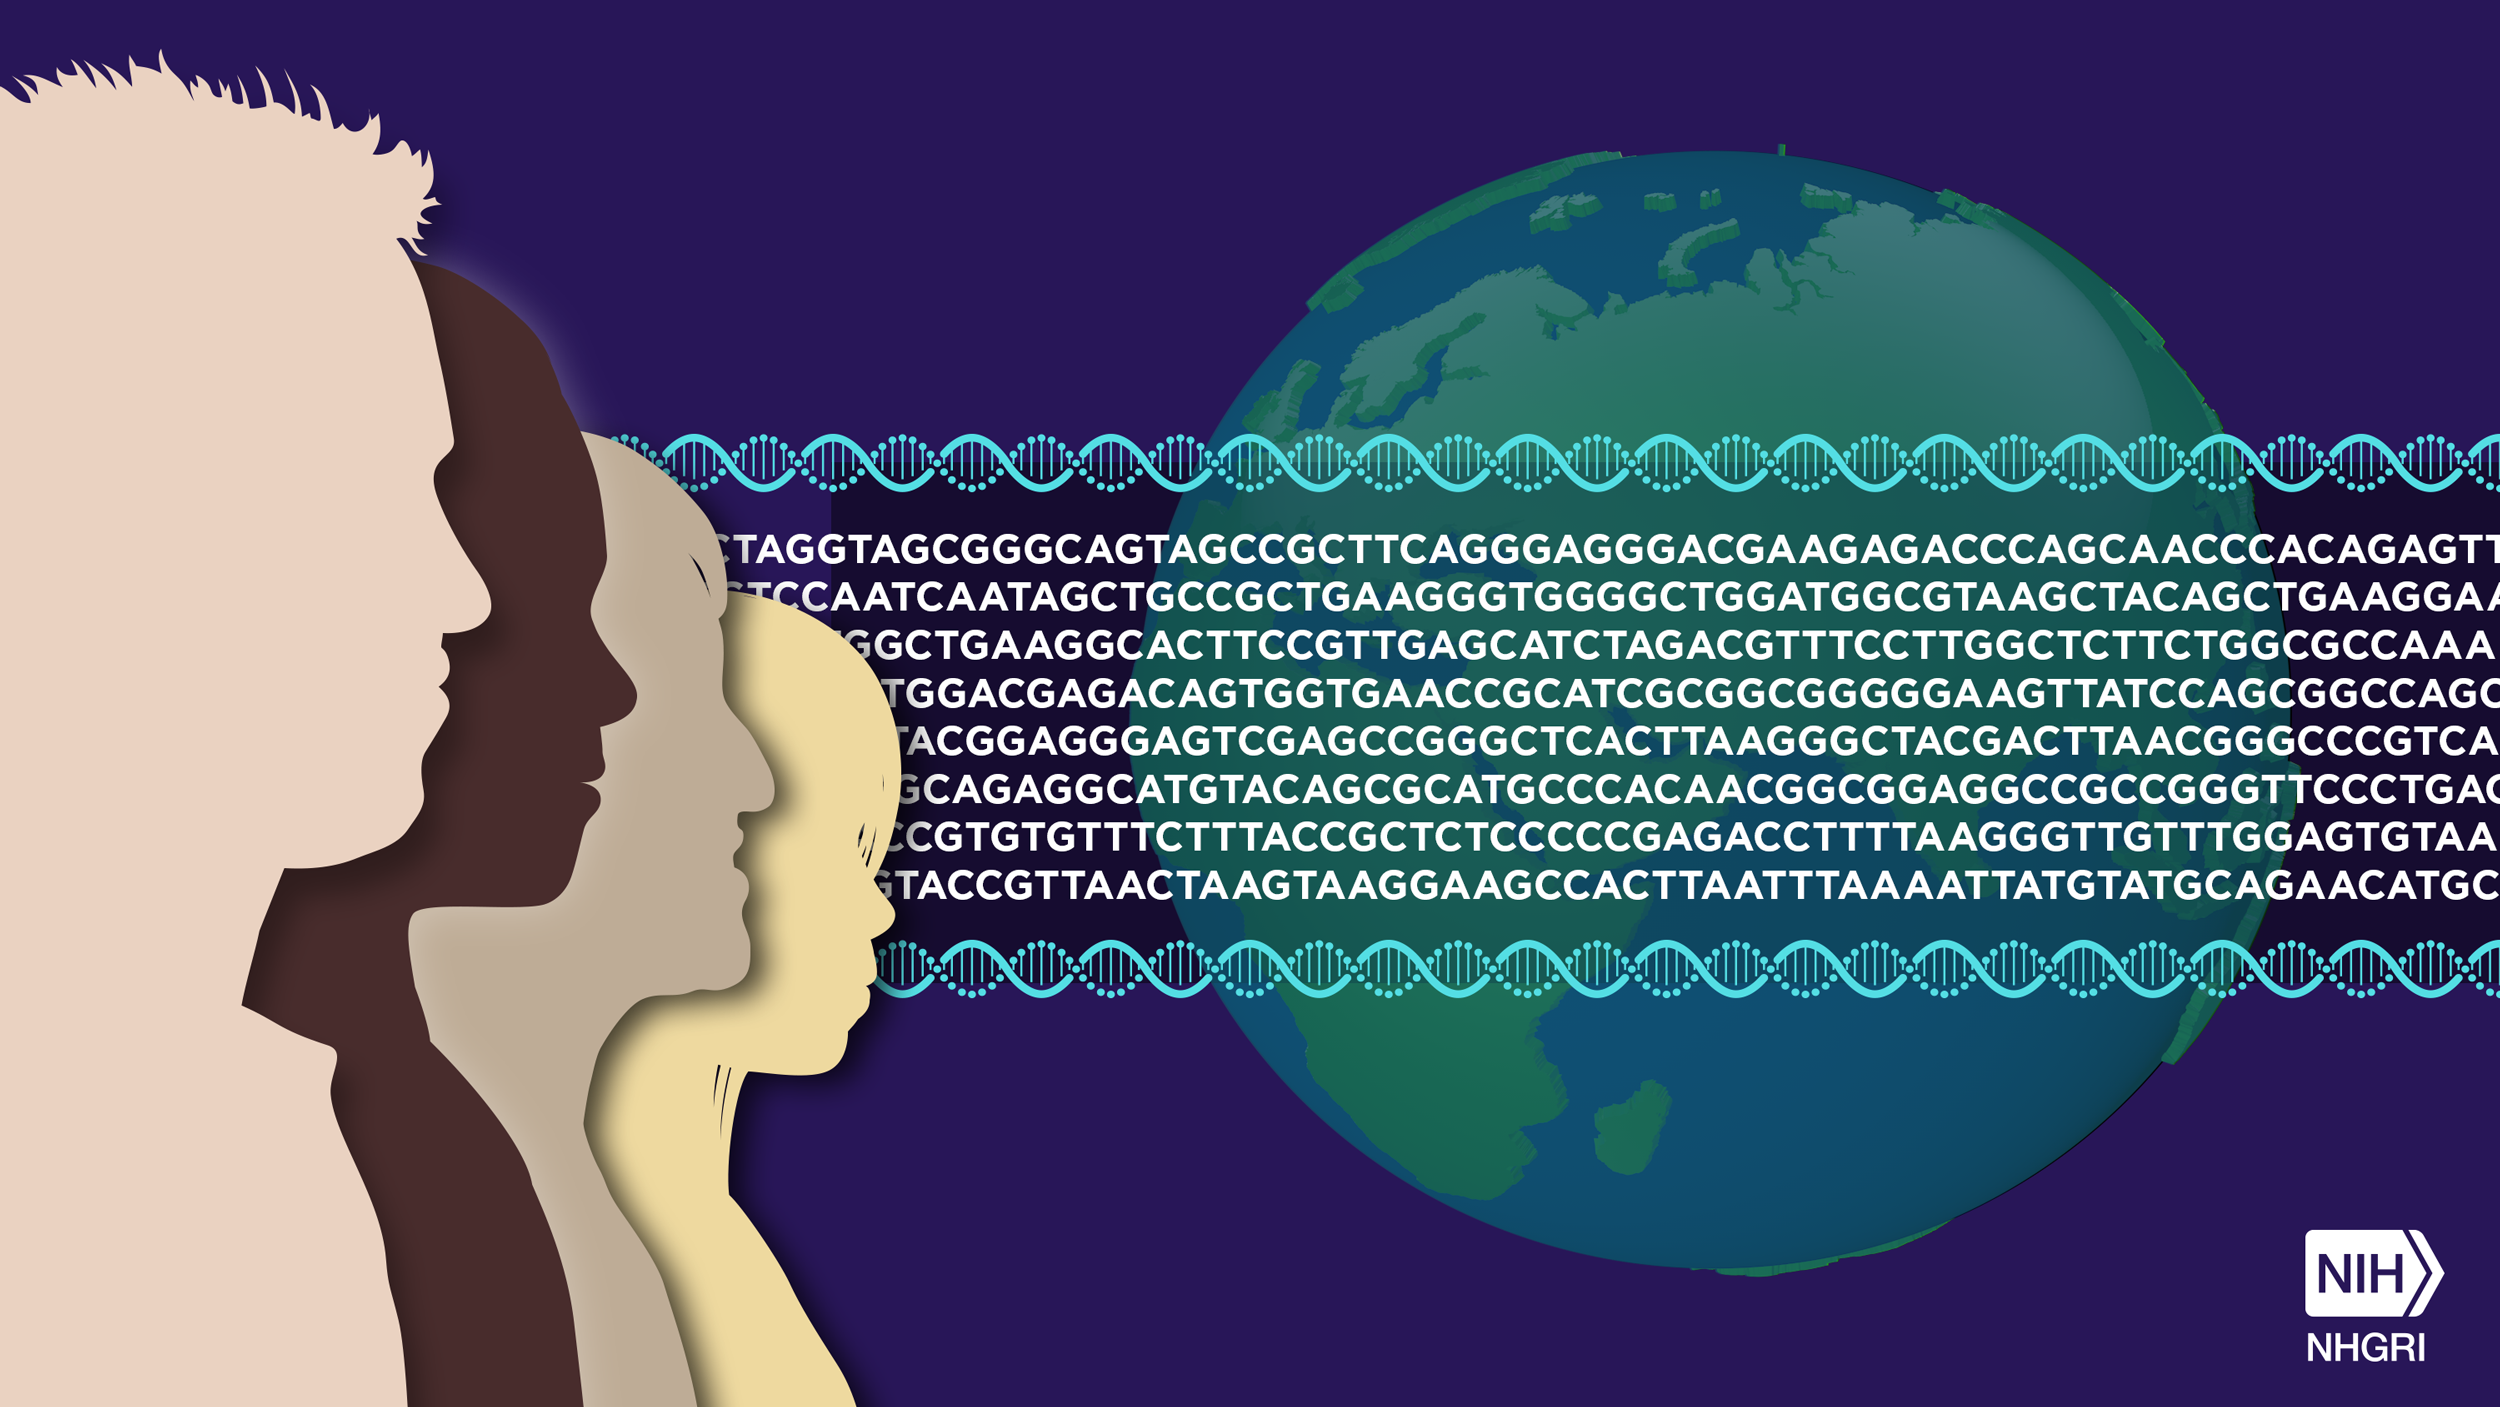 a genome of all the races